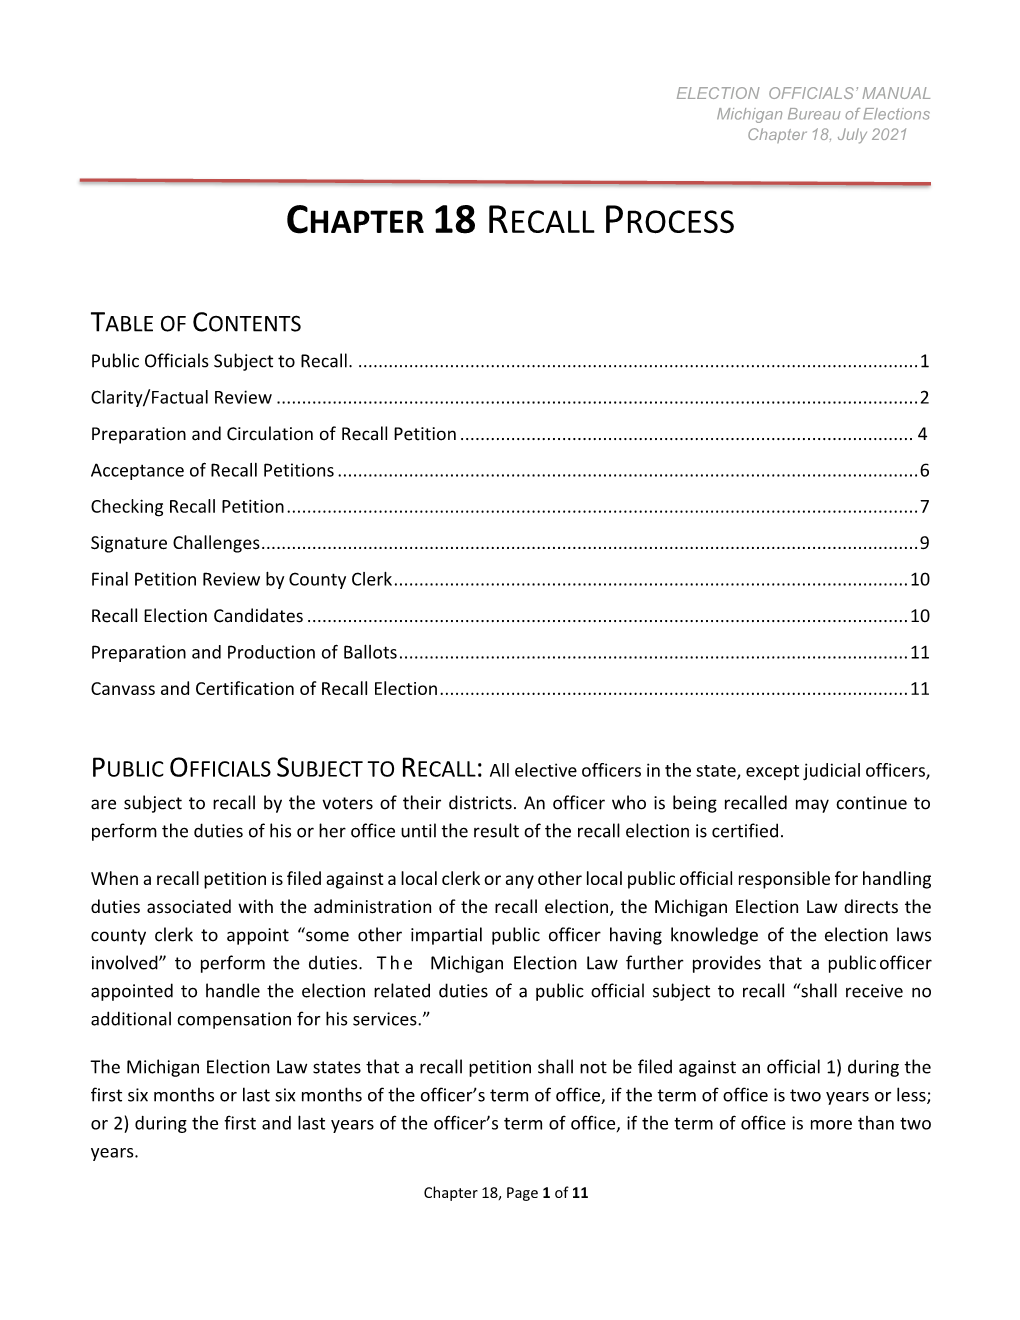 Chapter 18 Recall Process